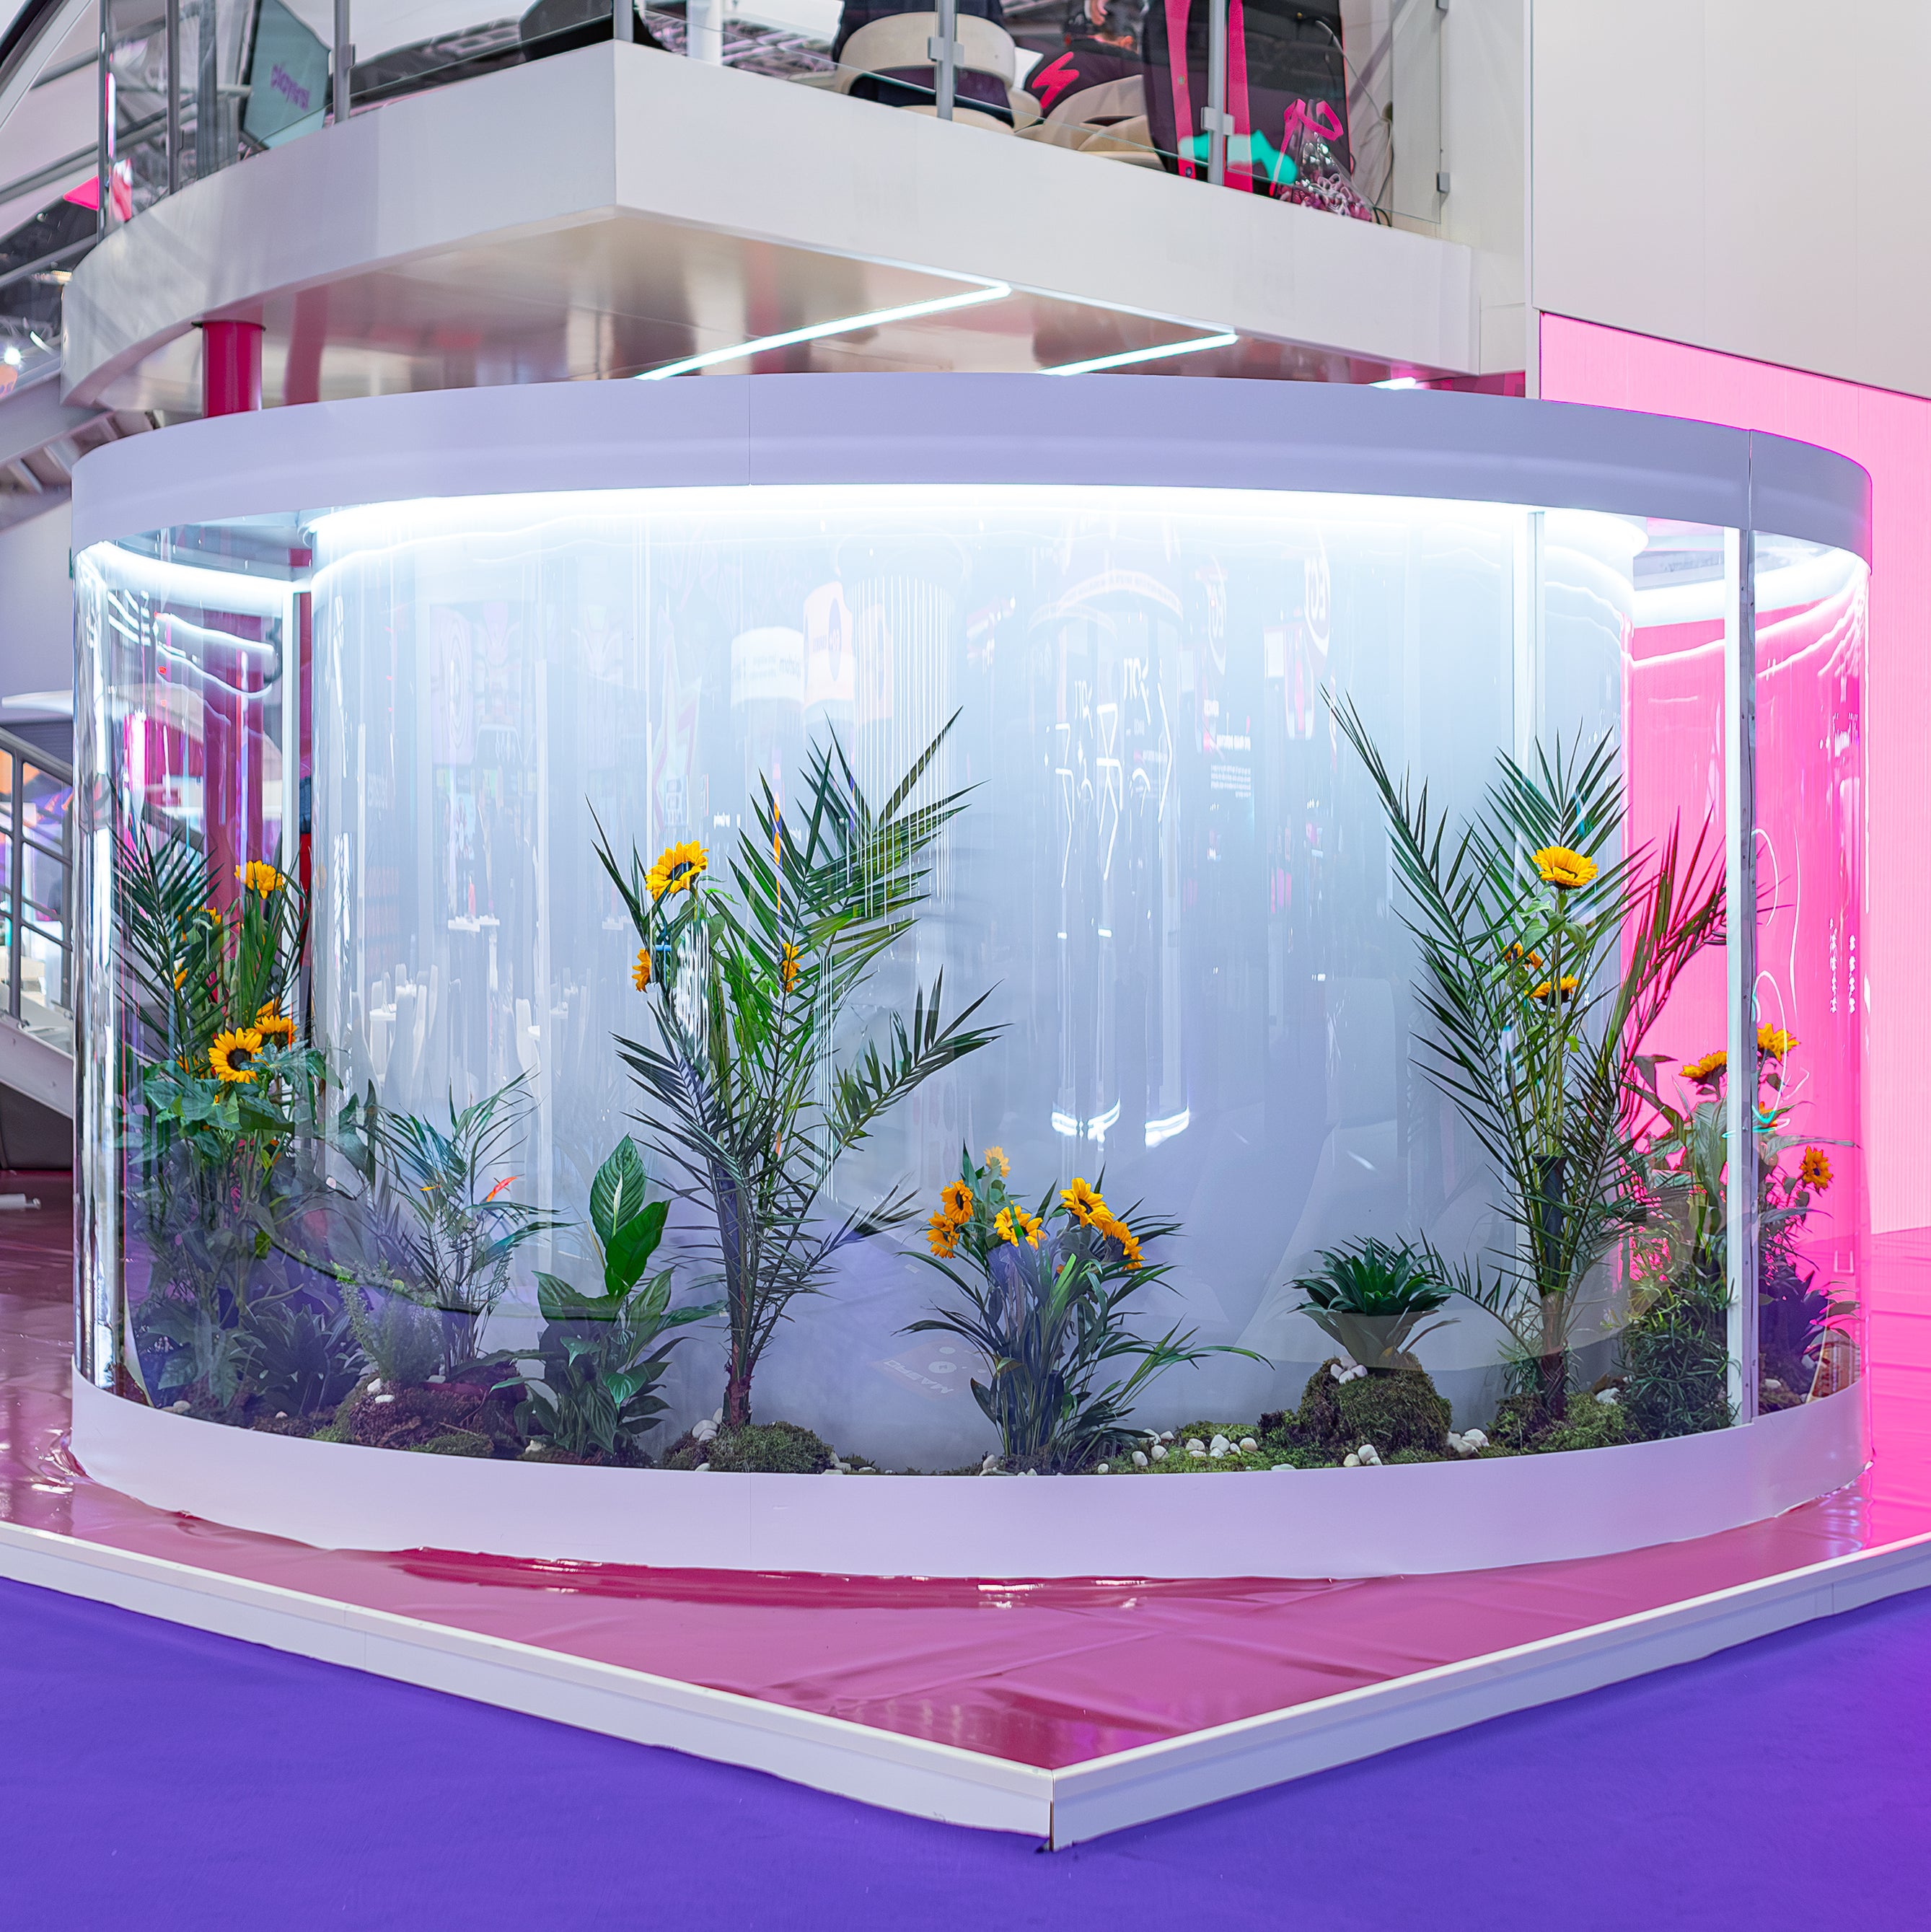 Luxury floral arrangement at the The ICE London Exhibition featuring bright yellow blooms set in a curved glass enclosure